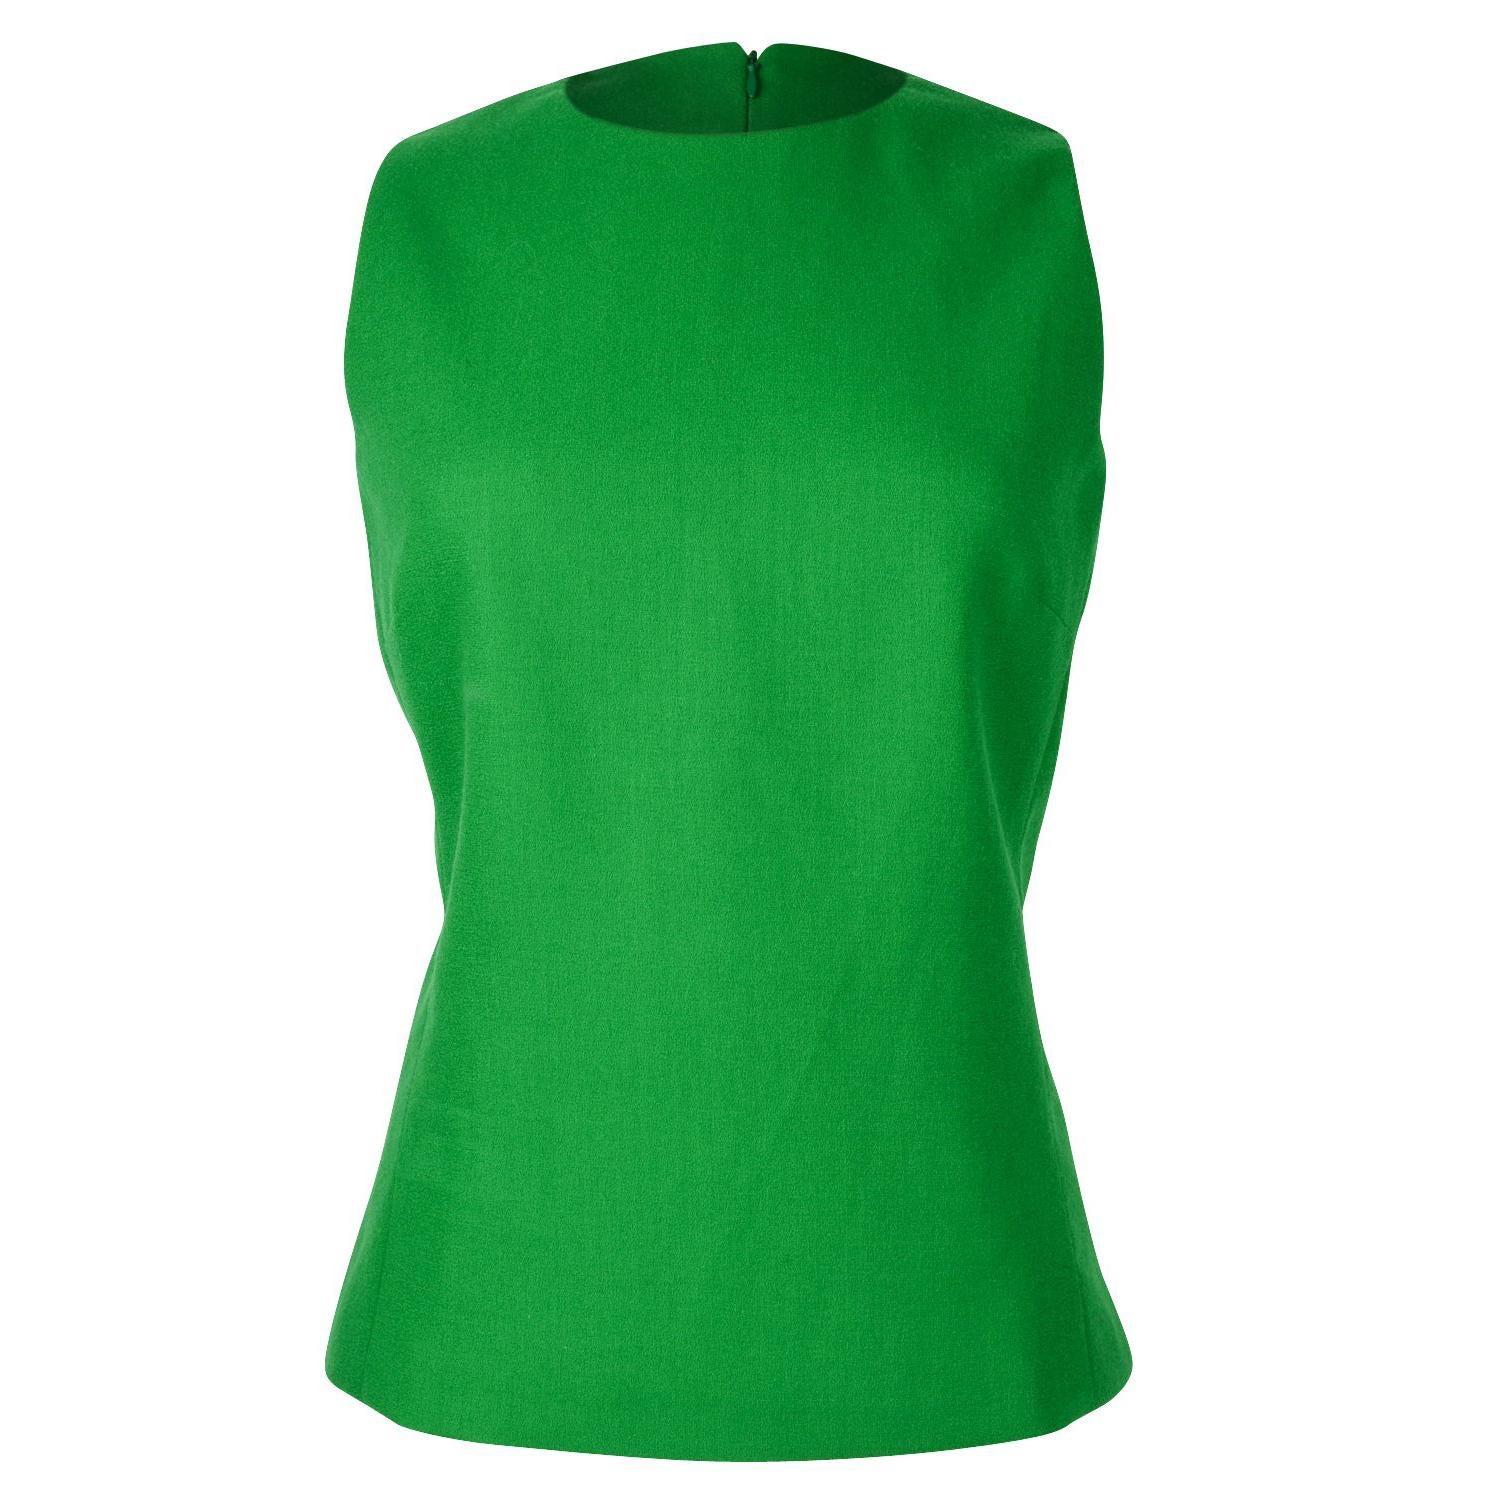 Christian Dior Top Emerald Green Sleeveless Shaped and Fitted fits 8